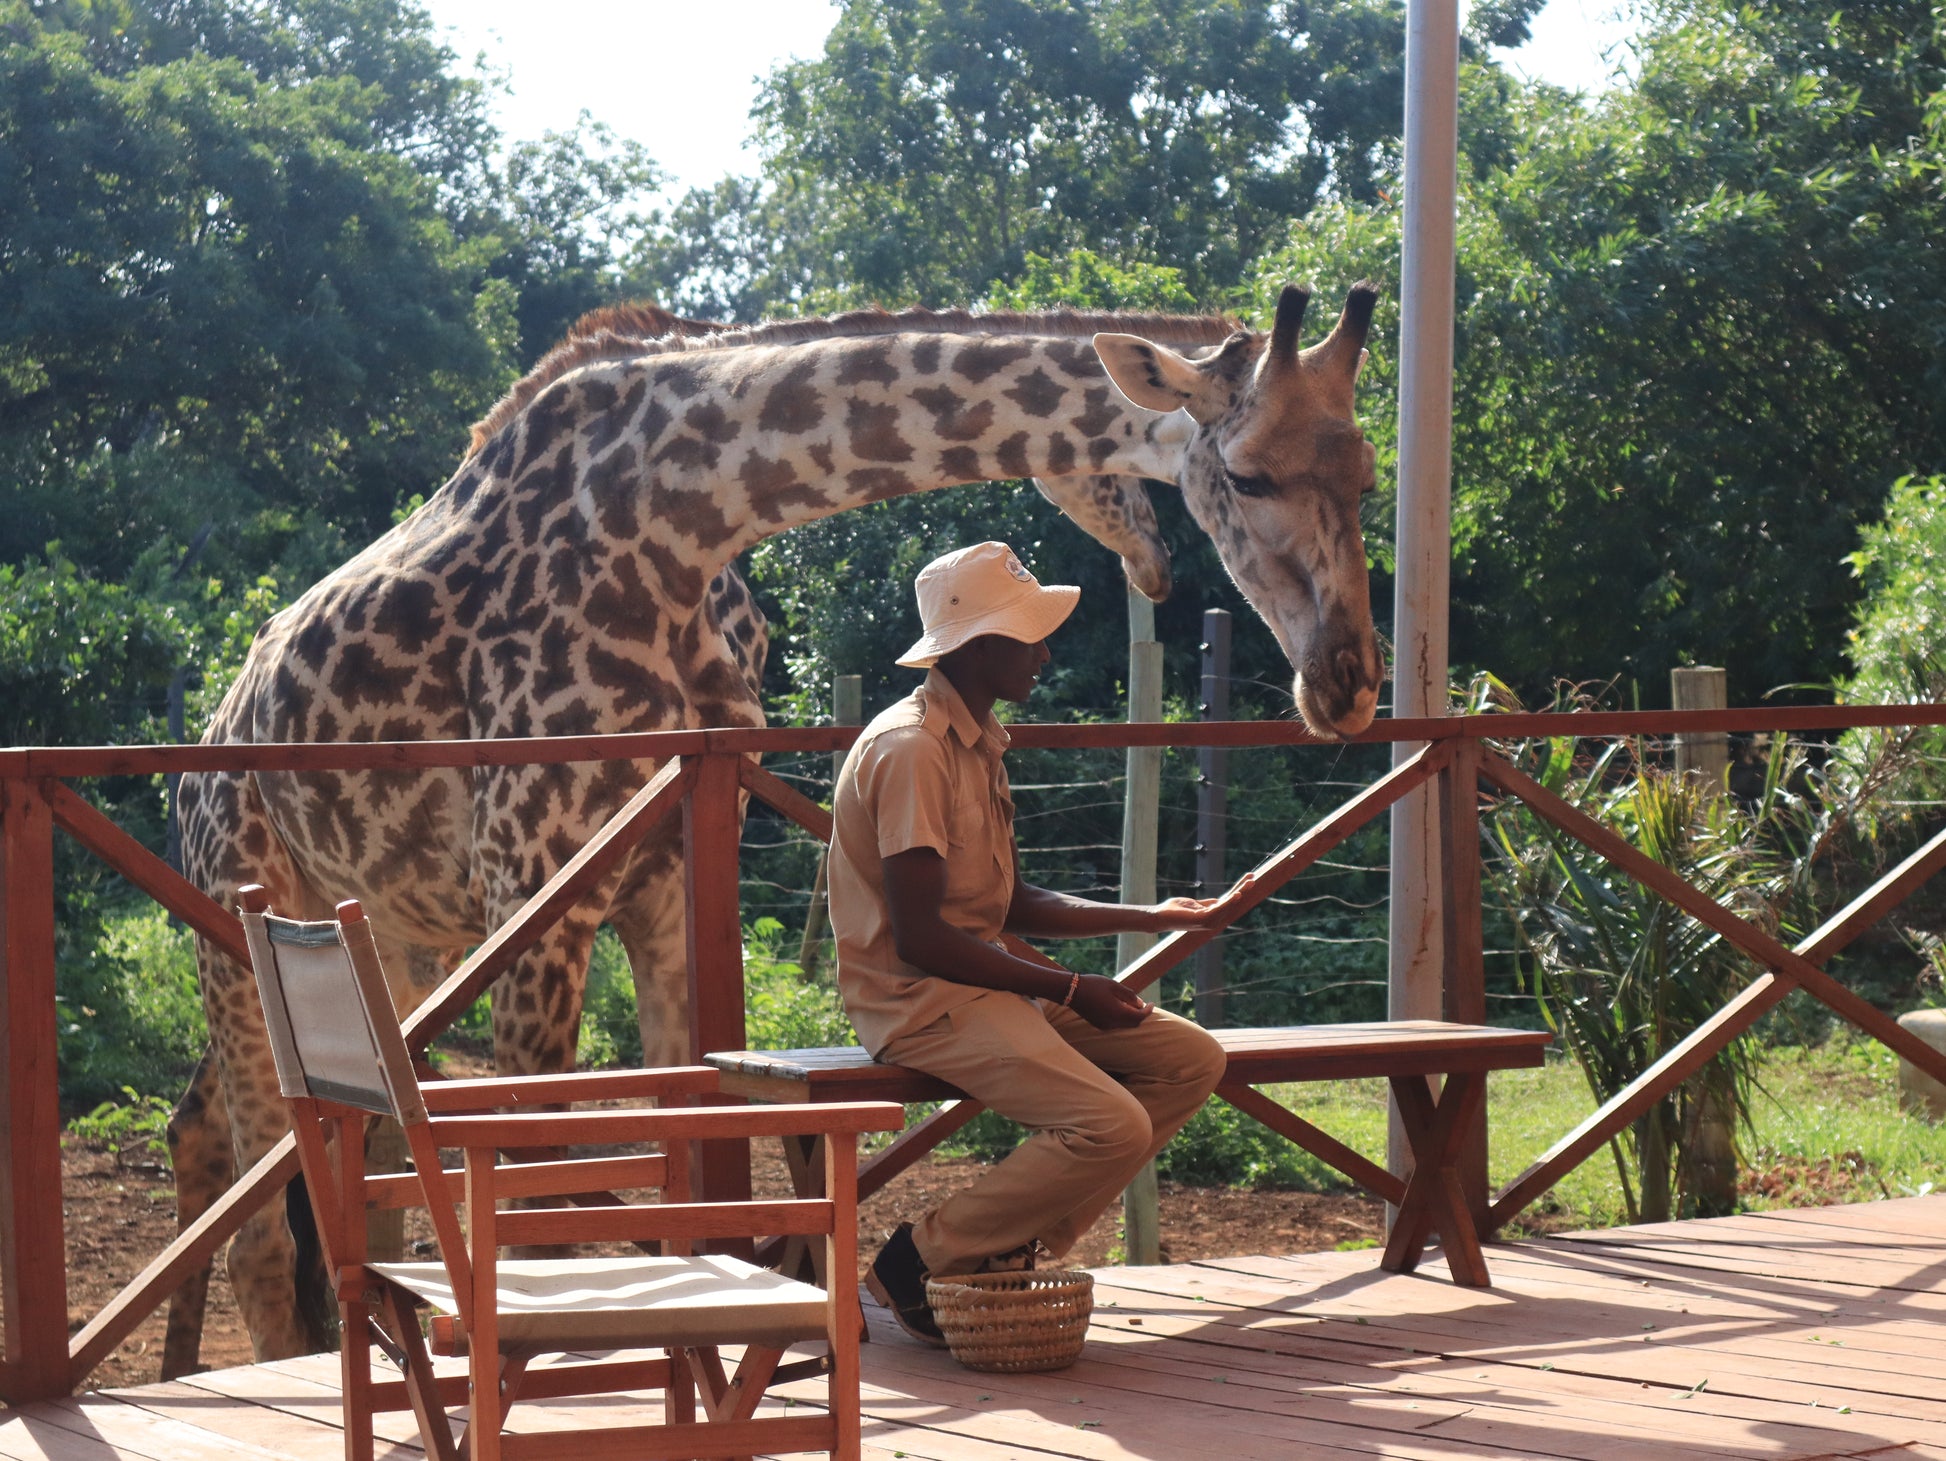 Giraffe being fed by a ranger at Borabora Wildlife Park in Diani